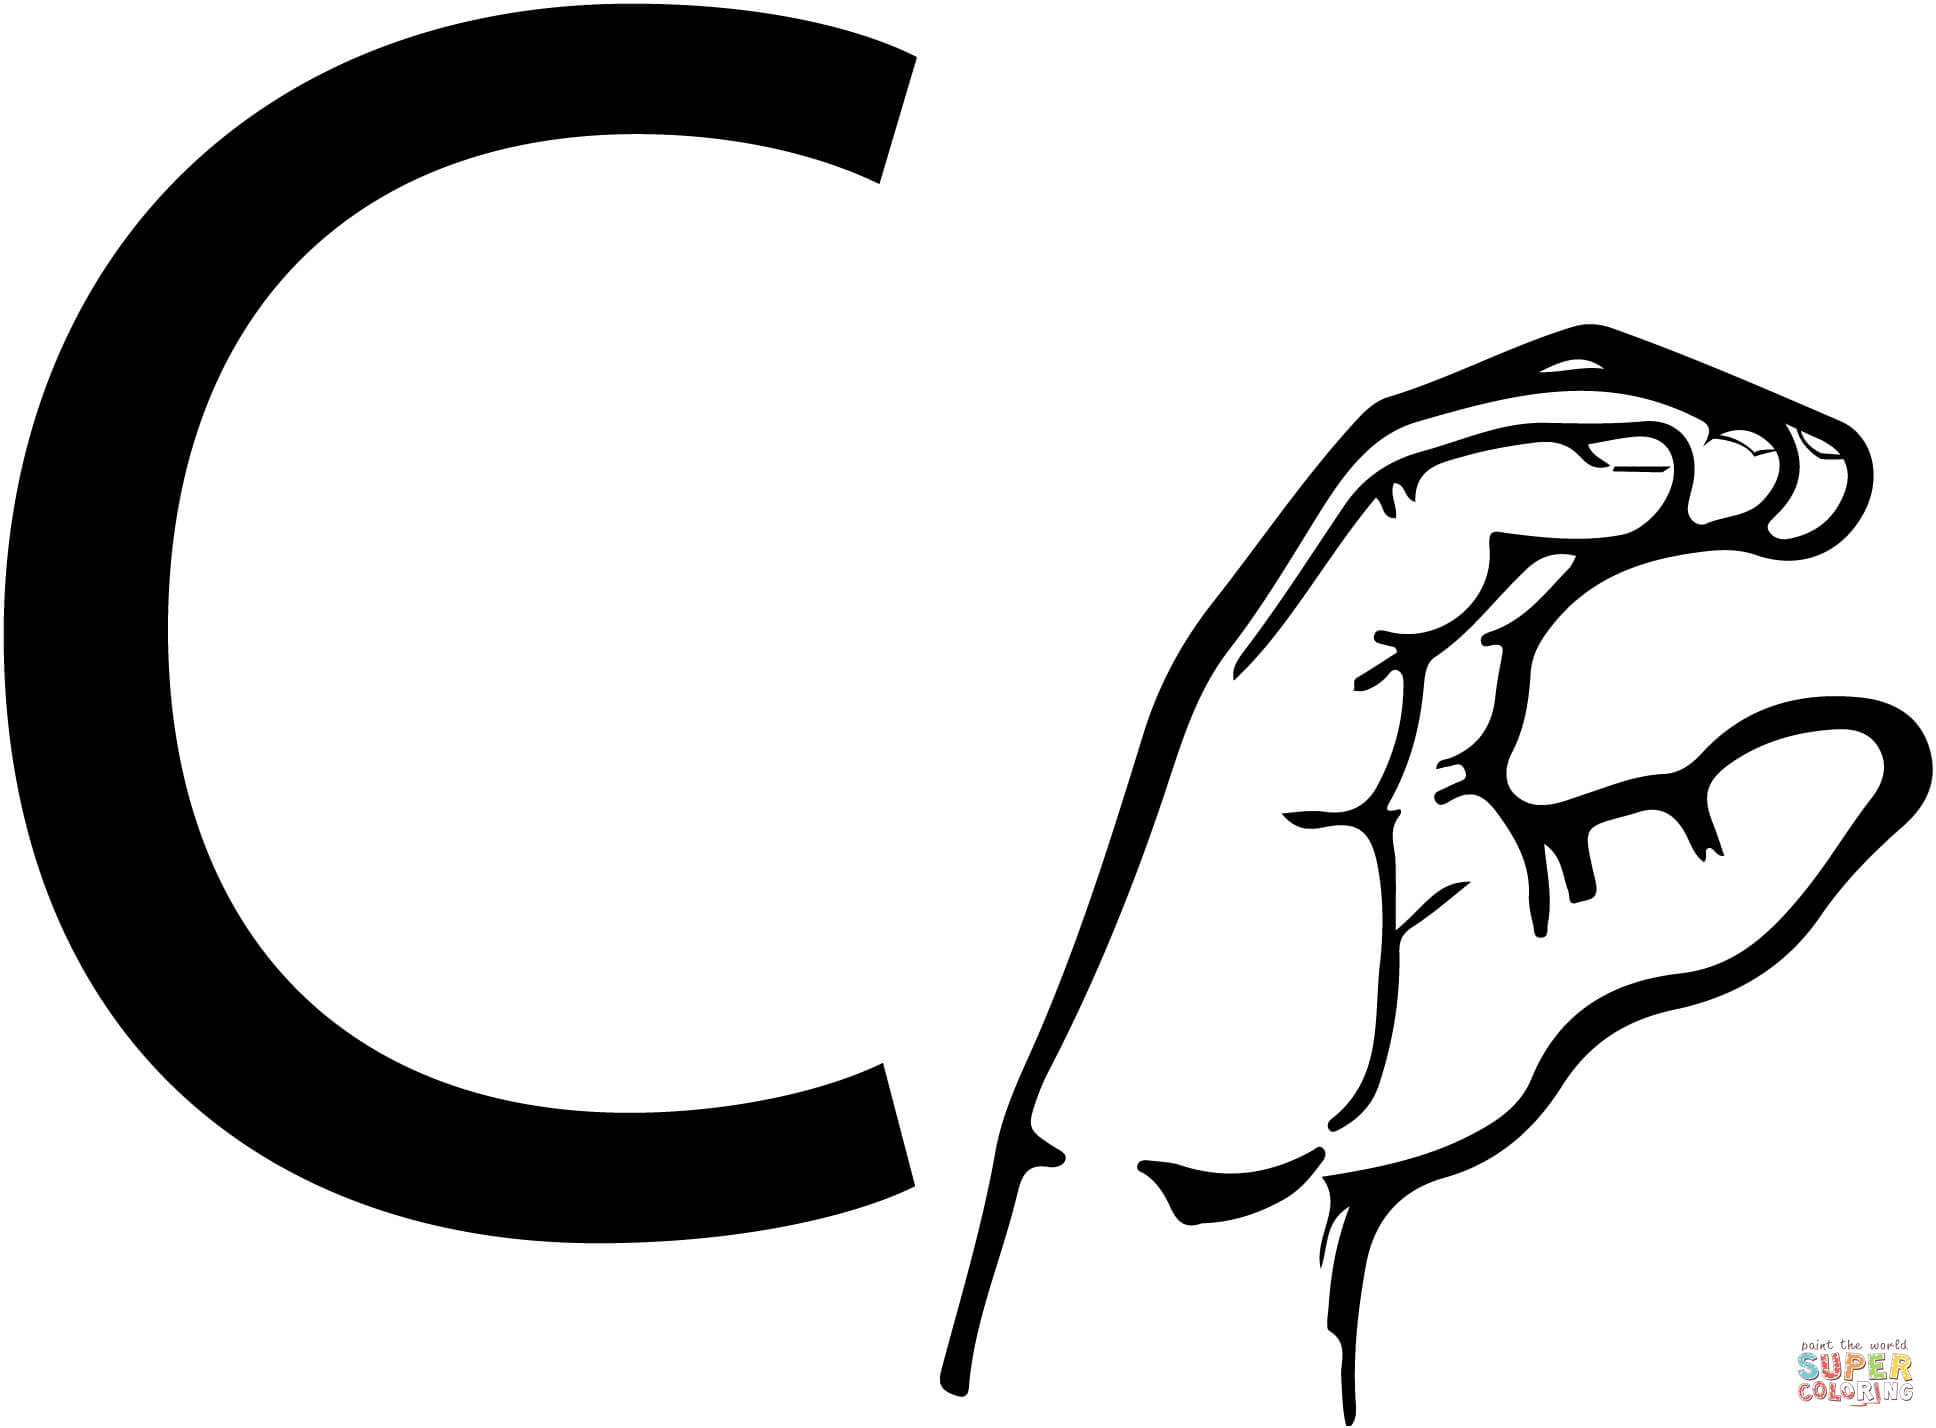 Letter C Coloring Pages For Preschoolers Asl Sign Language Letter C Coloring Page Free Printable Coloring Pages